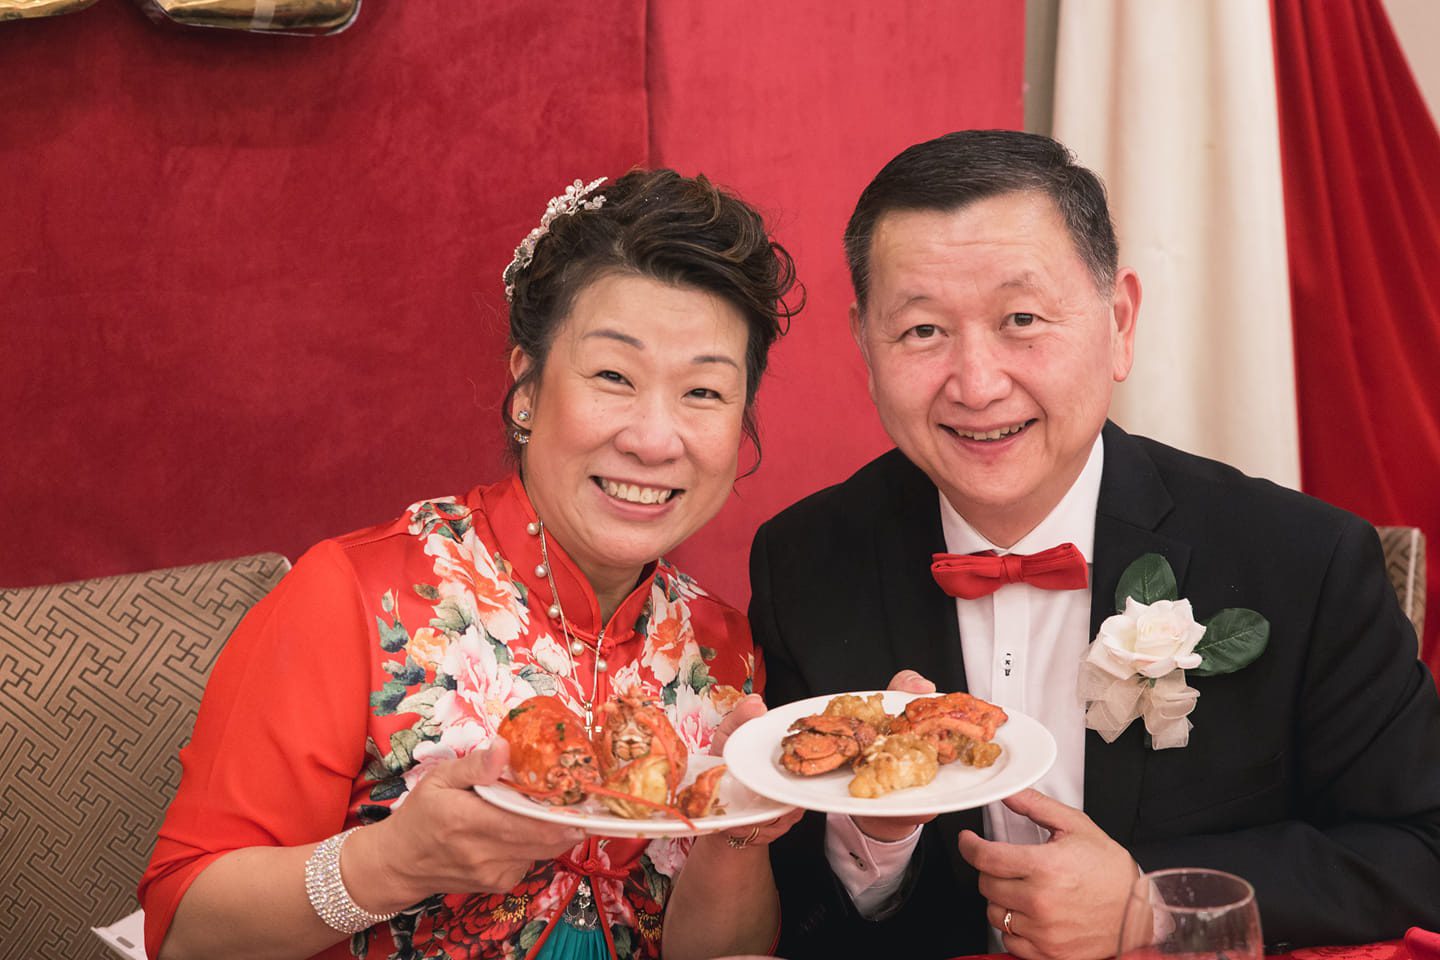 Andy Wang and wife celebrate 35 years married